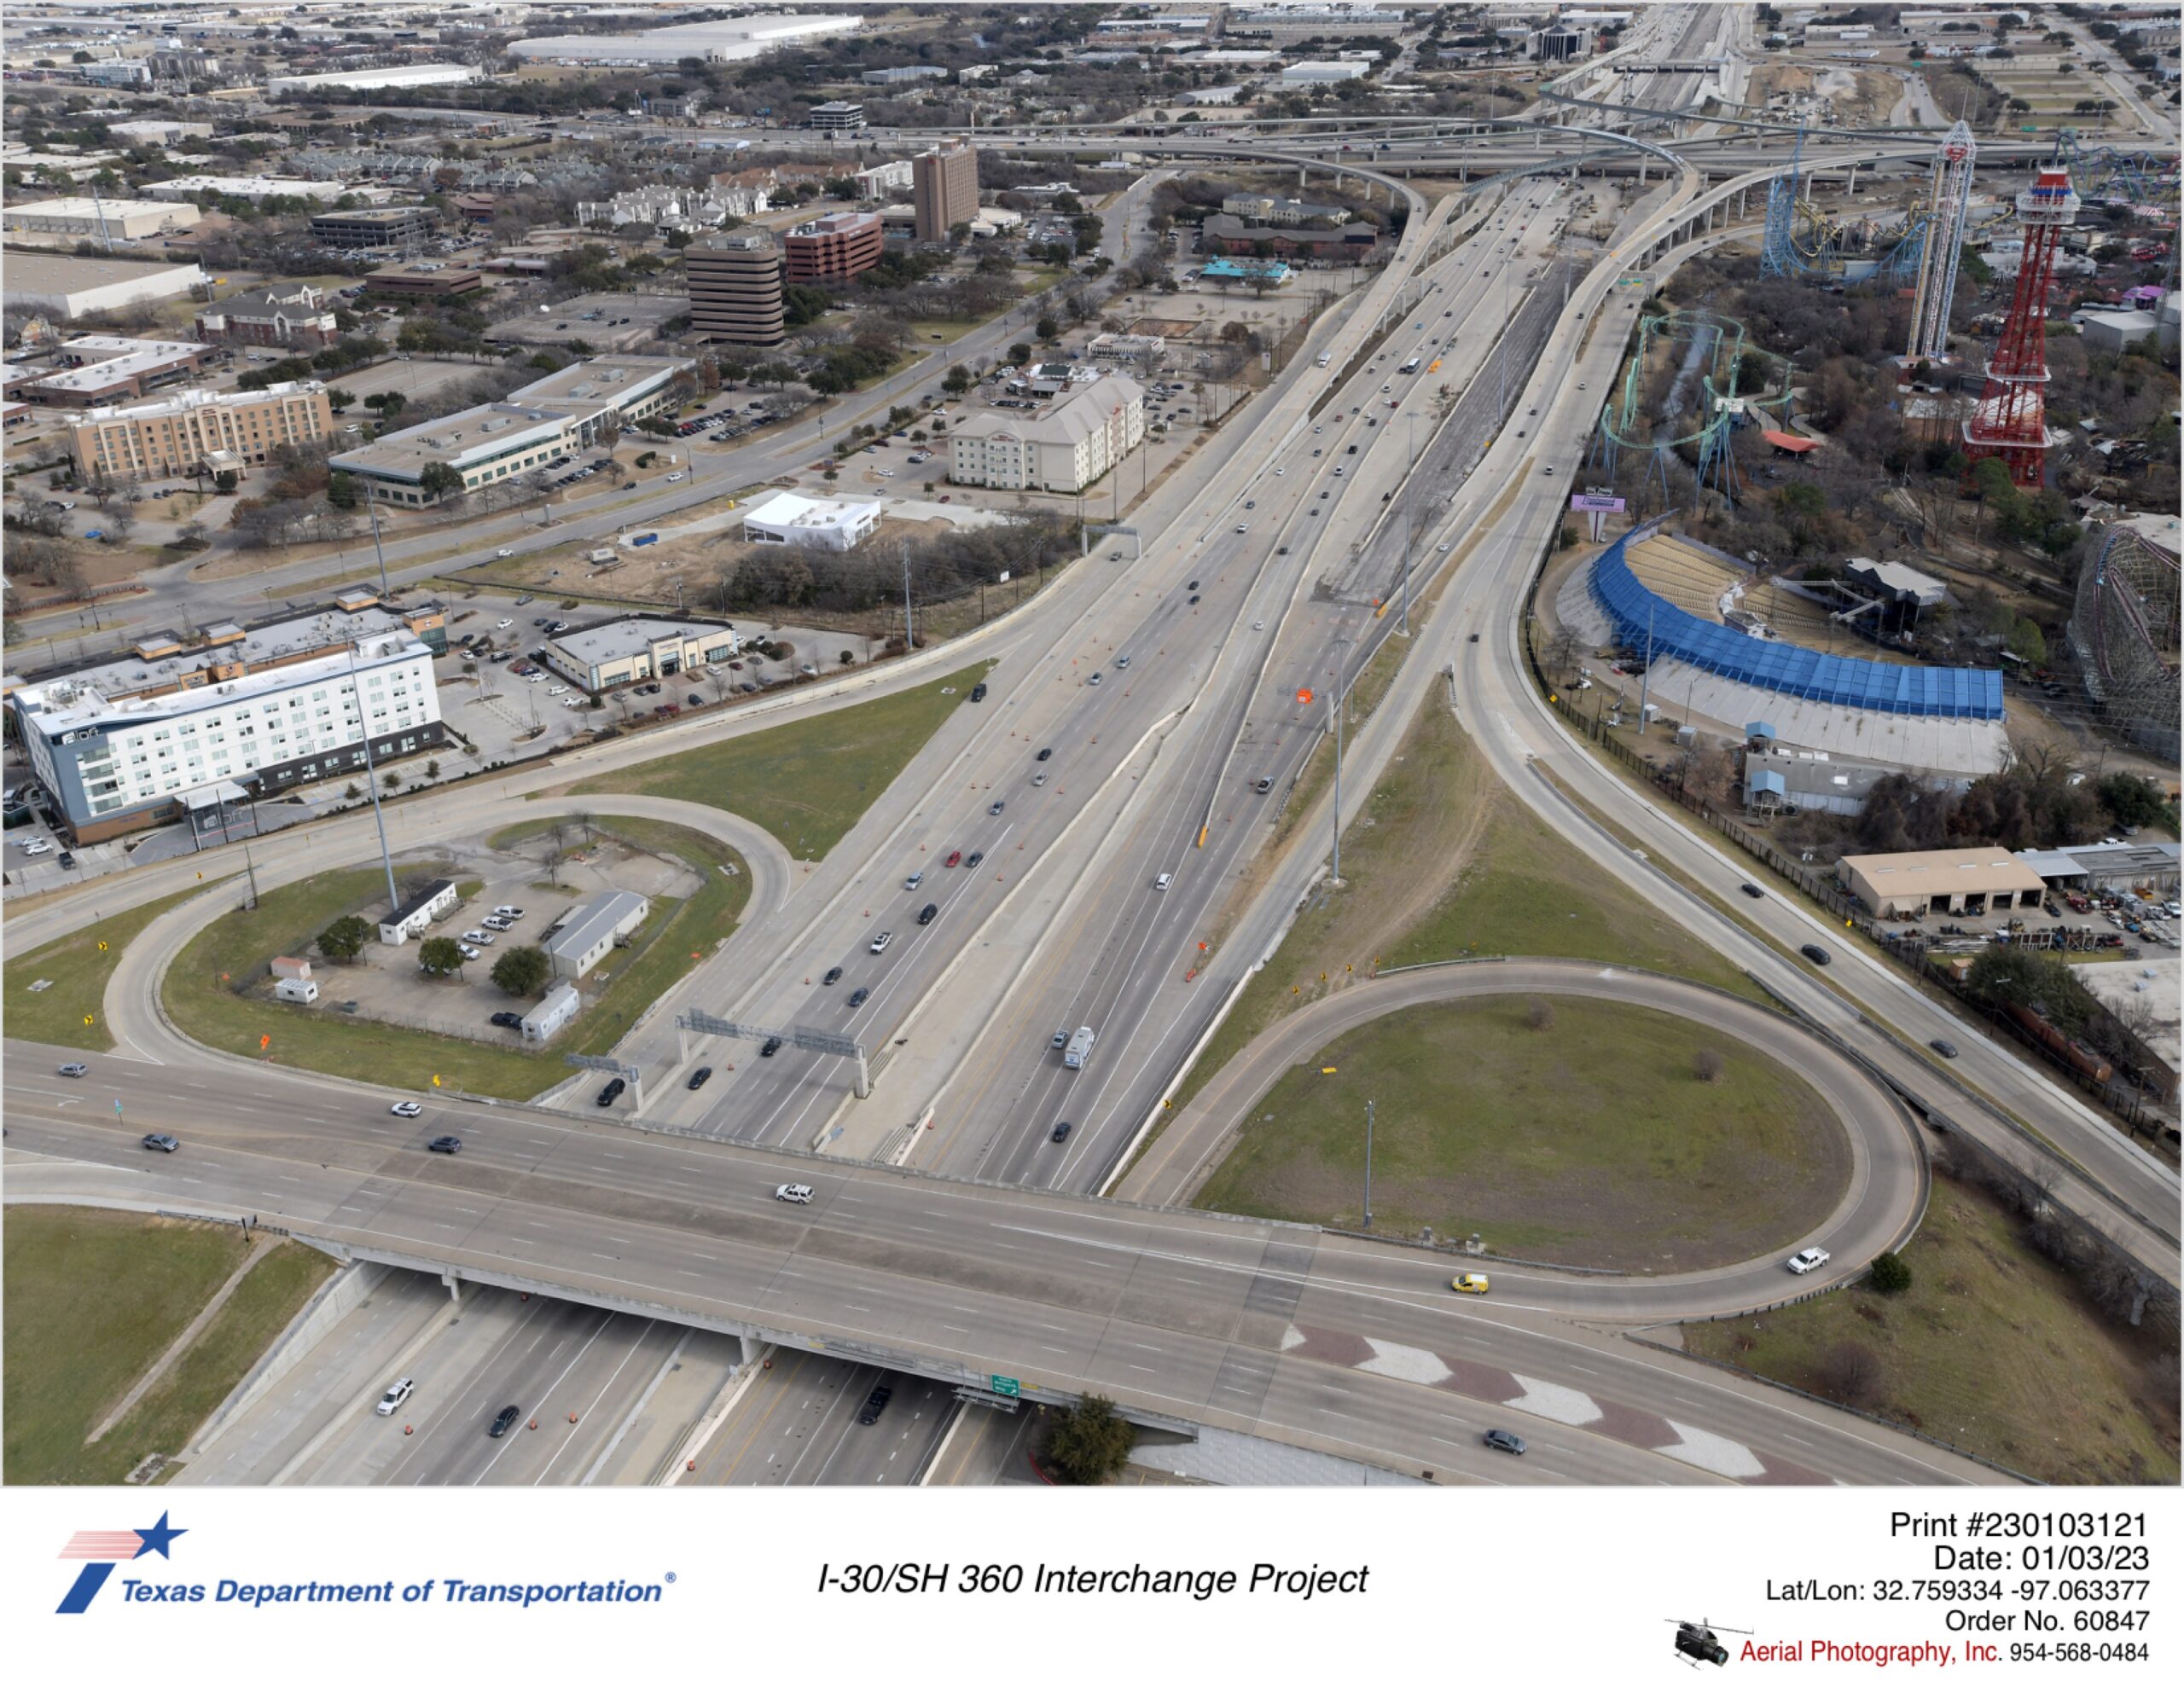 I-30 looking east at Ballpark Way interchange in foreground and SH 360 interchange in background.